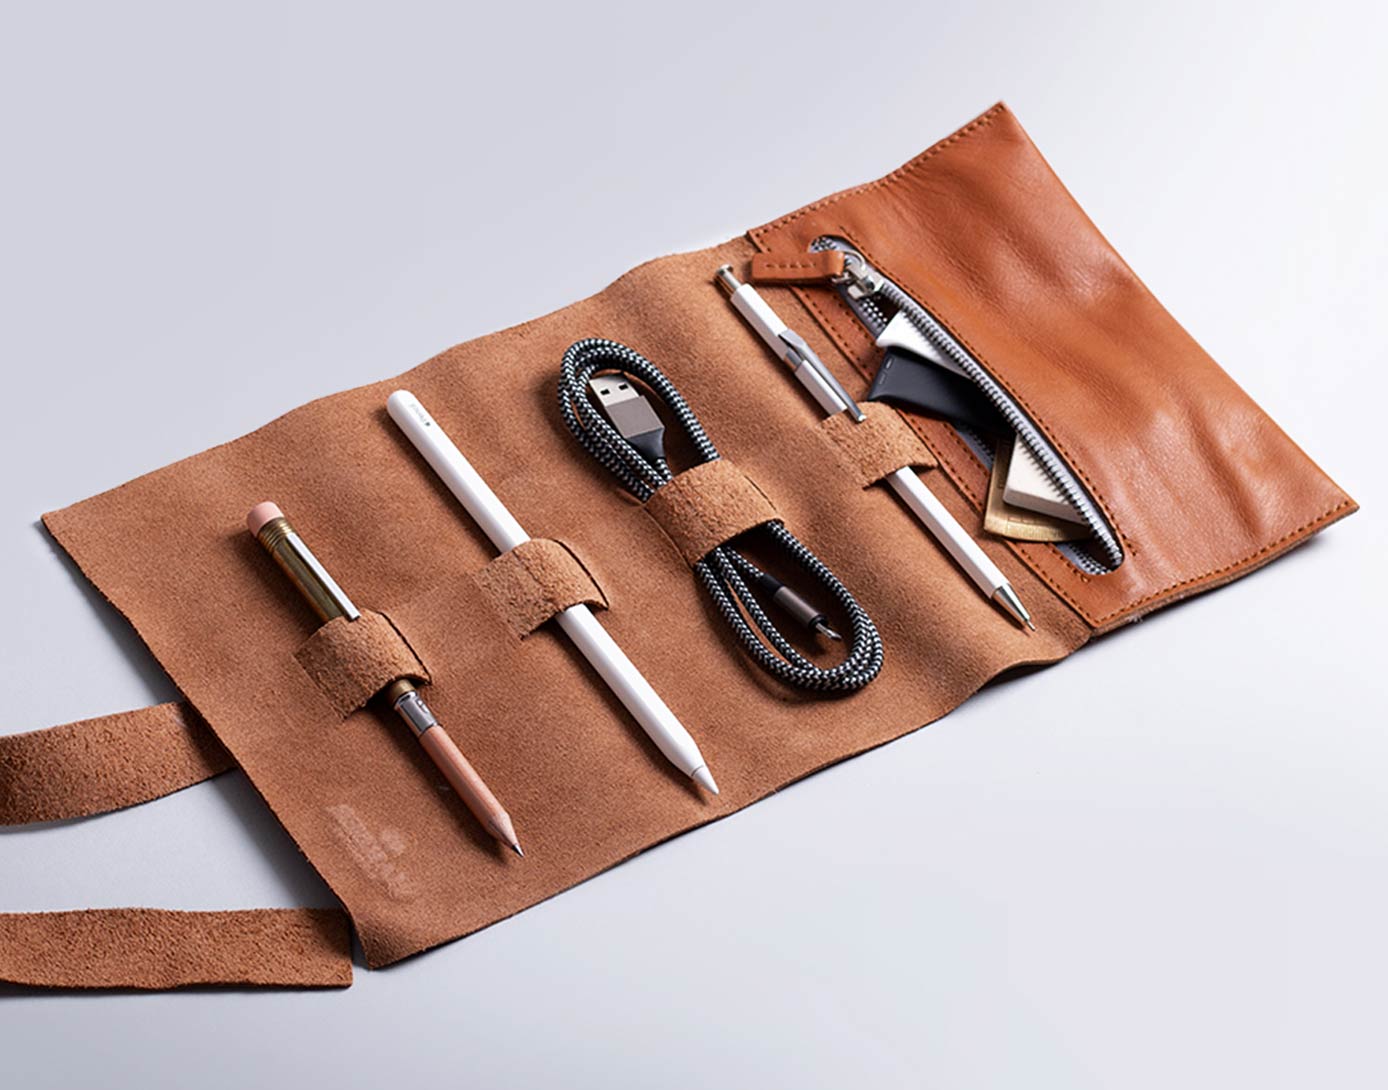 Leather organisers for cables and tools